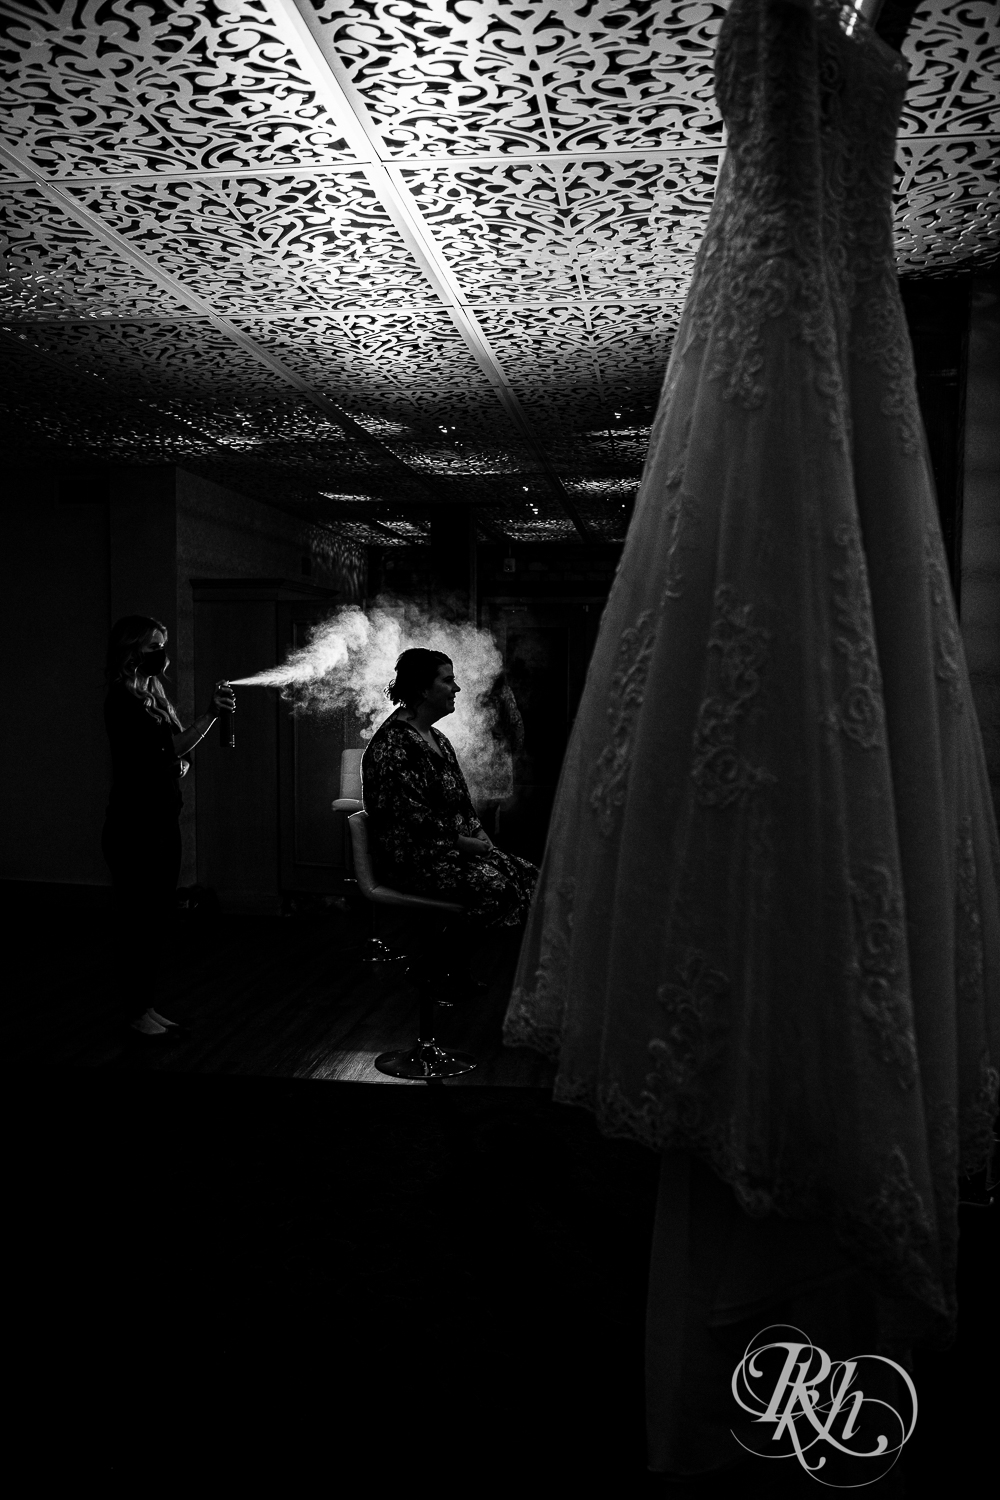 Bride getting hairsprayed with wedding dress in forefront at Minneapolis Event Center in Minneapolis, Minnesota.